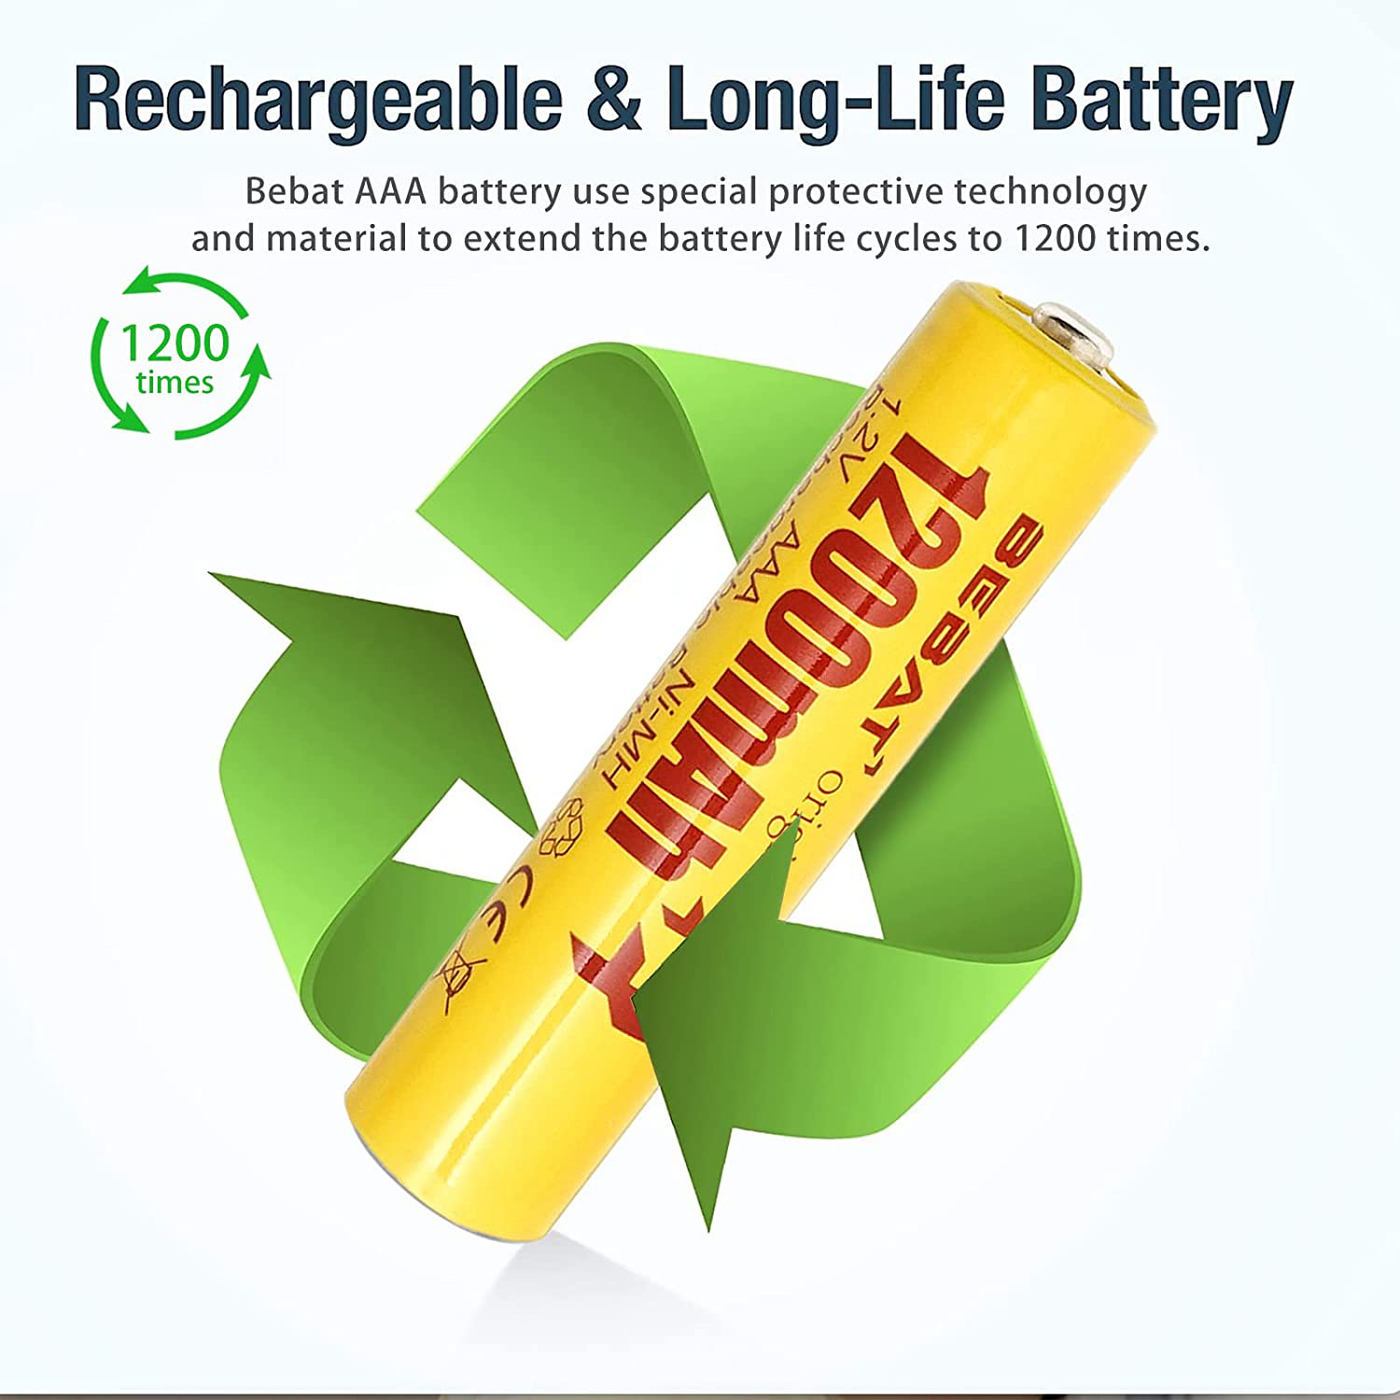 Rechargeable Batteries AA and AAA Batteries Variety Pack 10 Cell Has 8 1200mAh Triple AAA Rechargeable Battery and 2 2900mAh Double A Battery 1.2V Household NiMH Rechargable Batteries Combo Pack